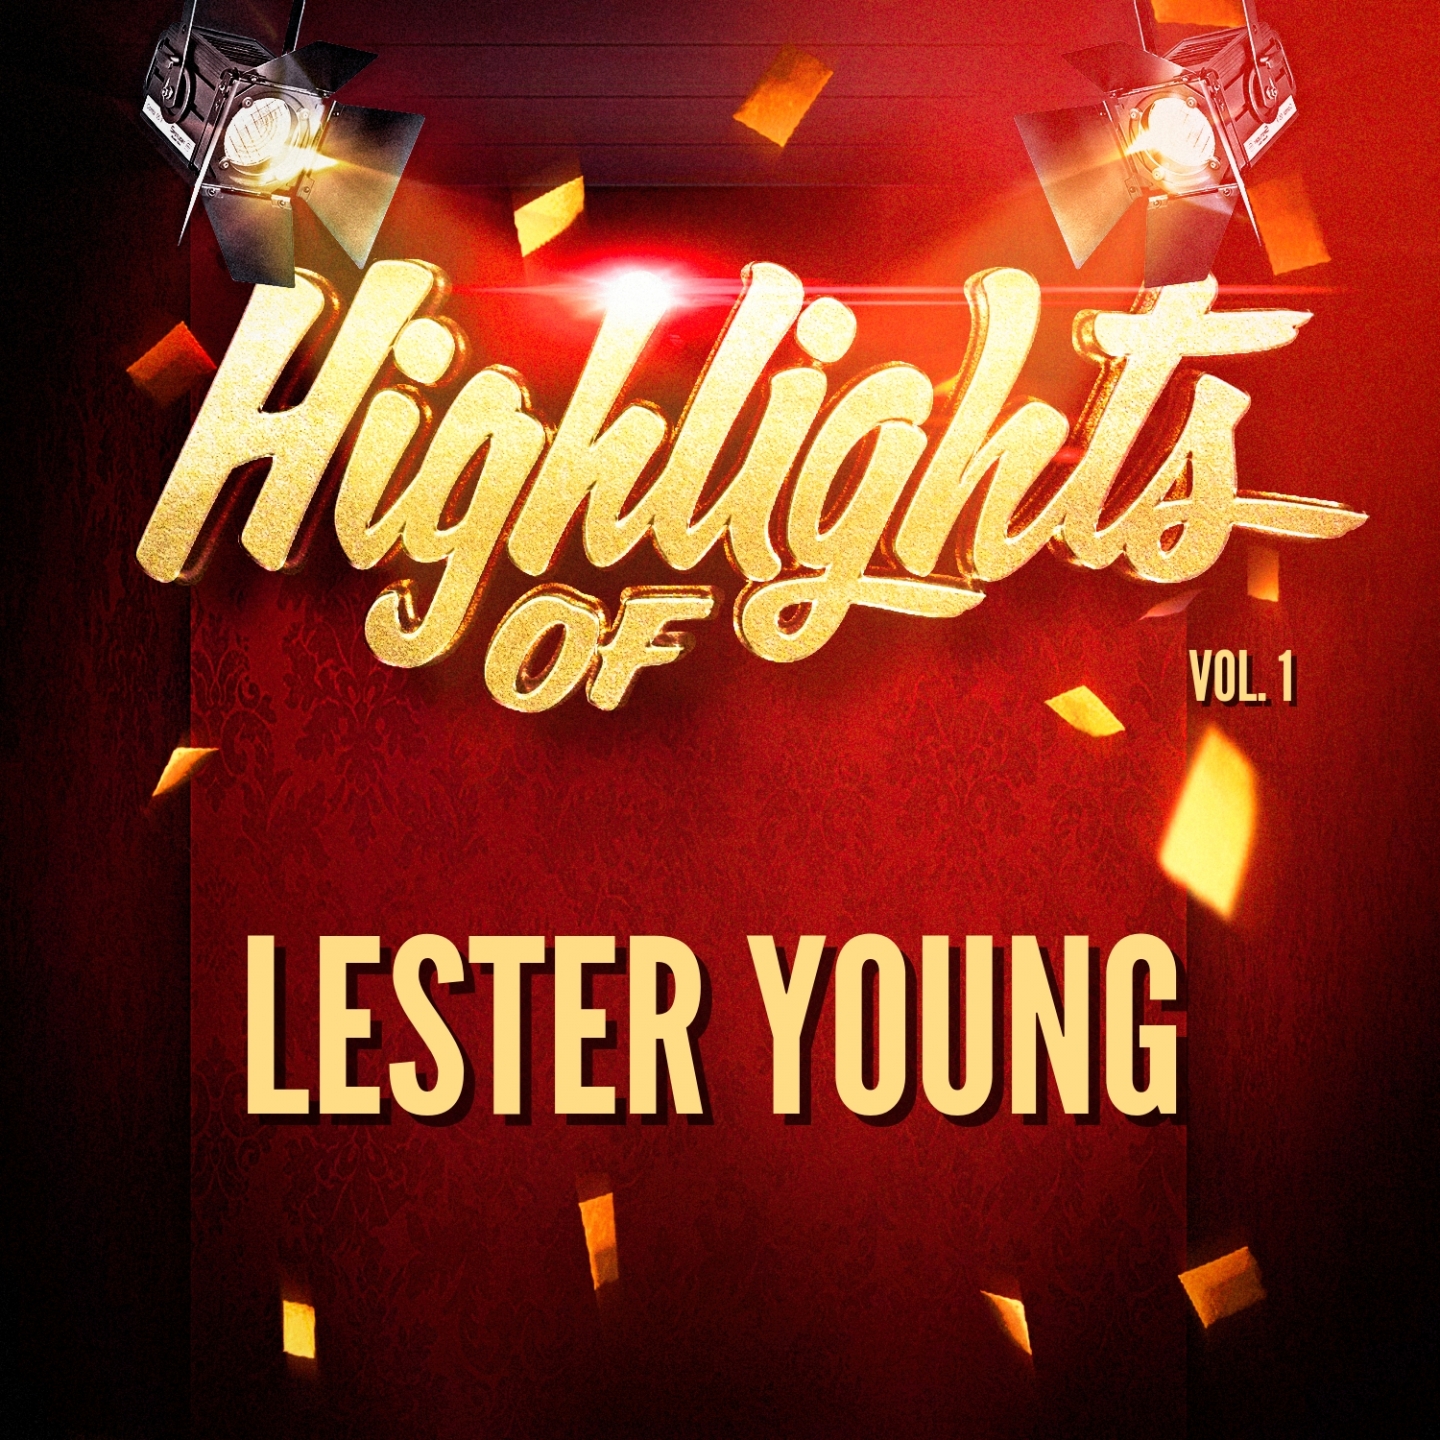 Highlights of Lester Young, Vol. 1